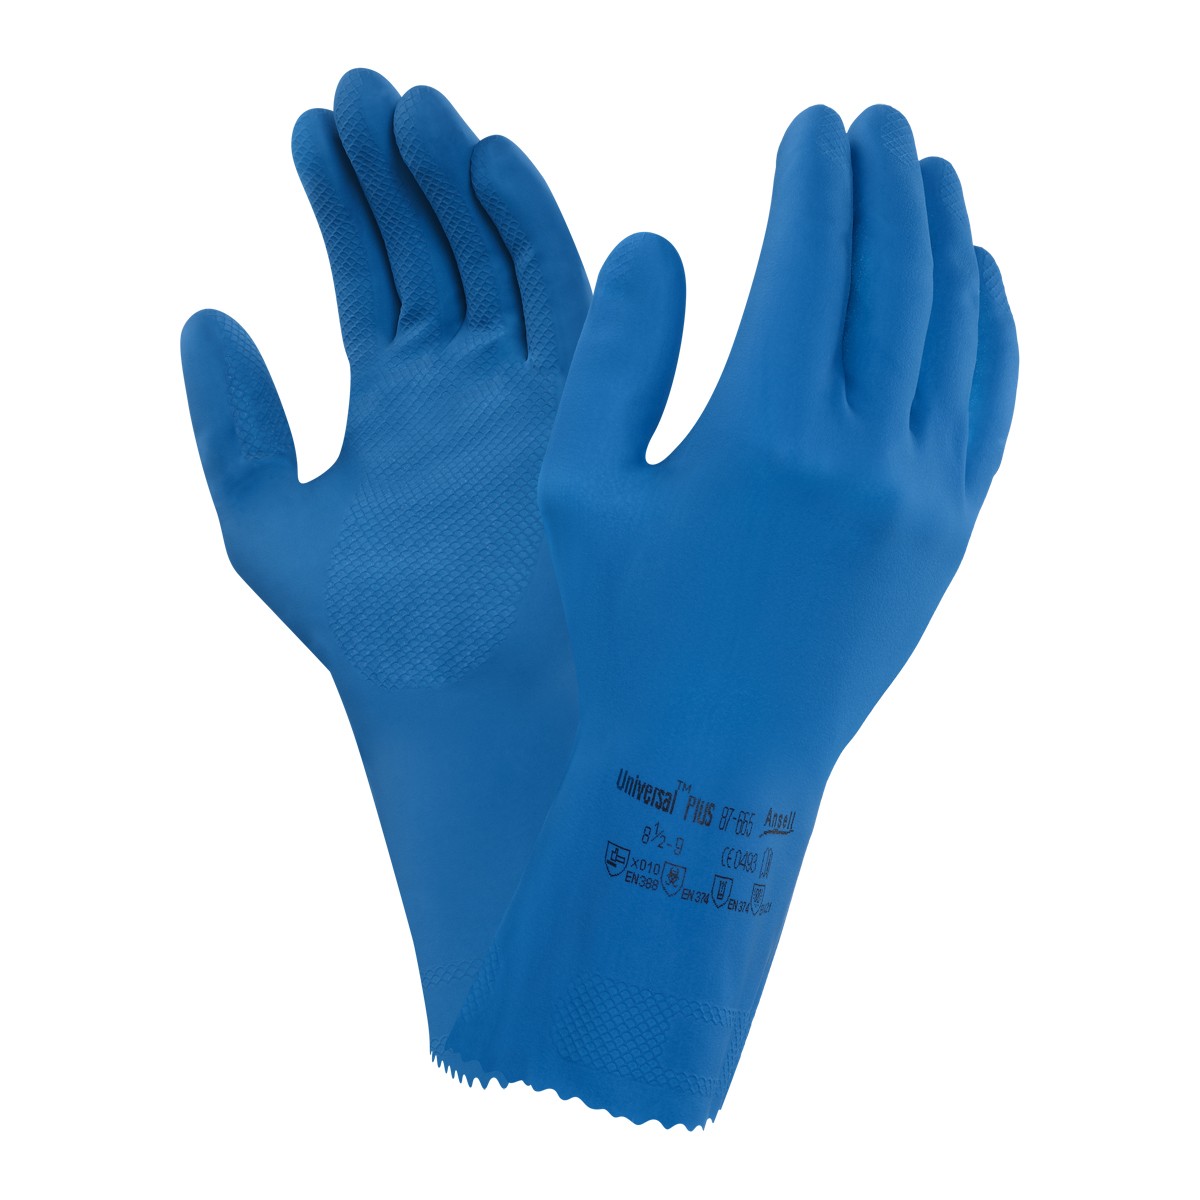 87-665 ALPHATEC CHEMICAL RESISTANT GLOVE - ANSELL